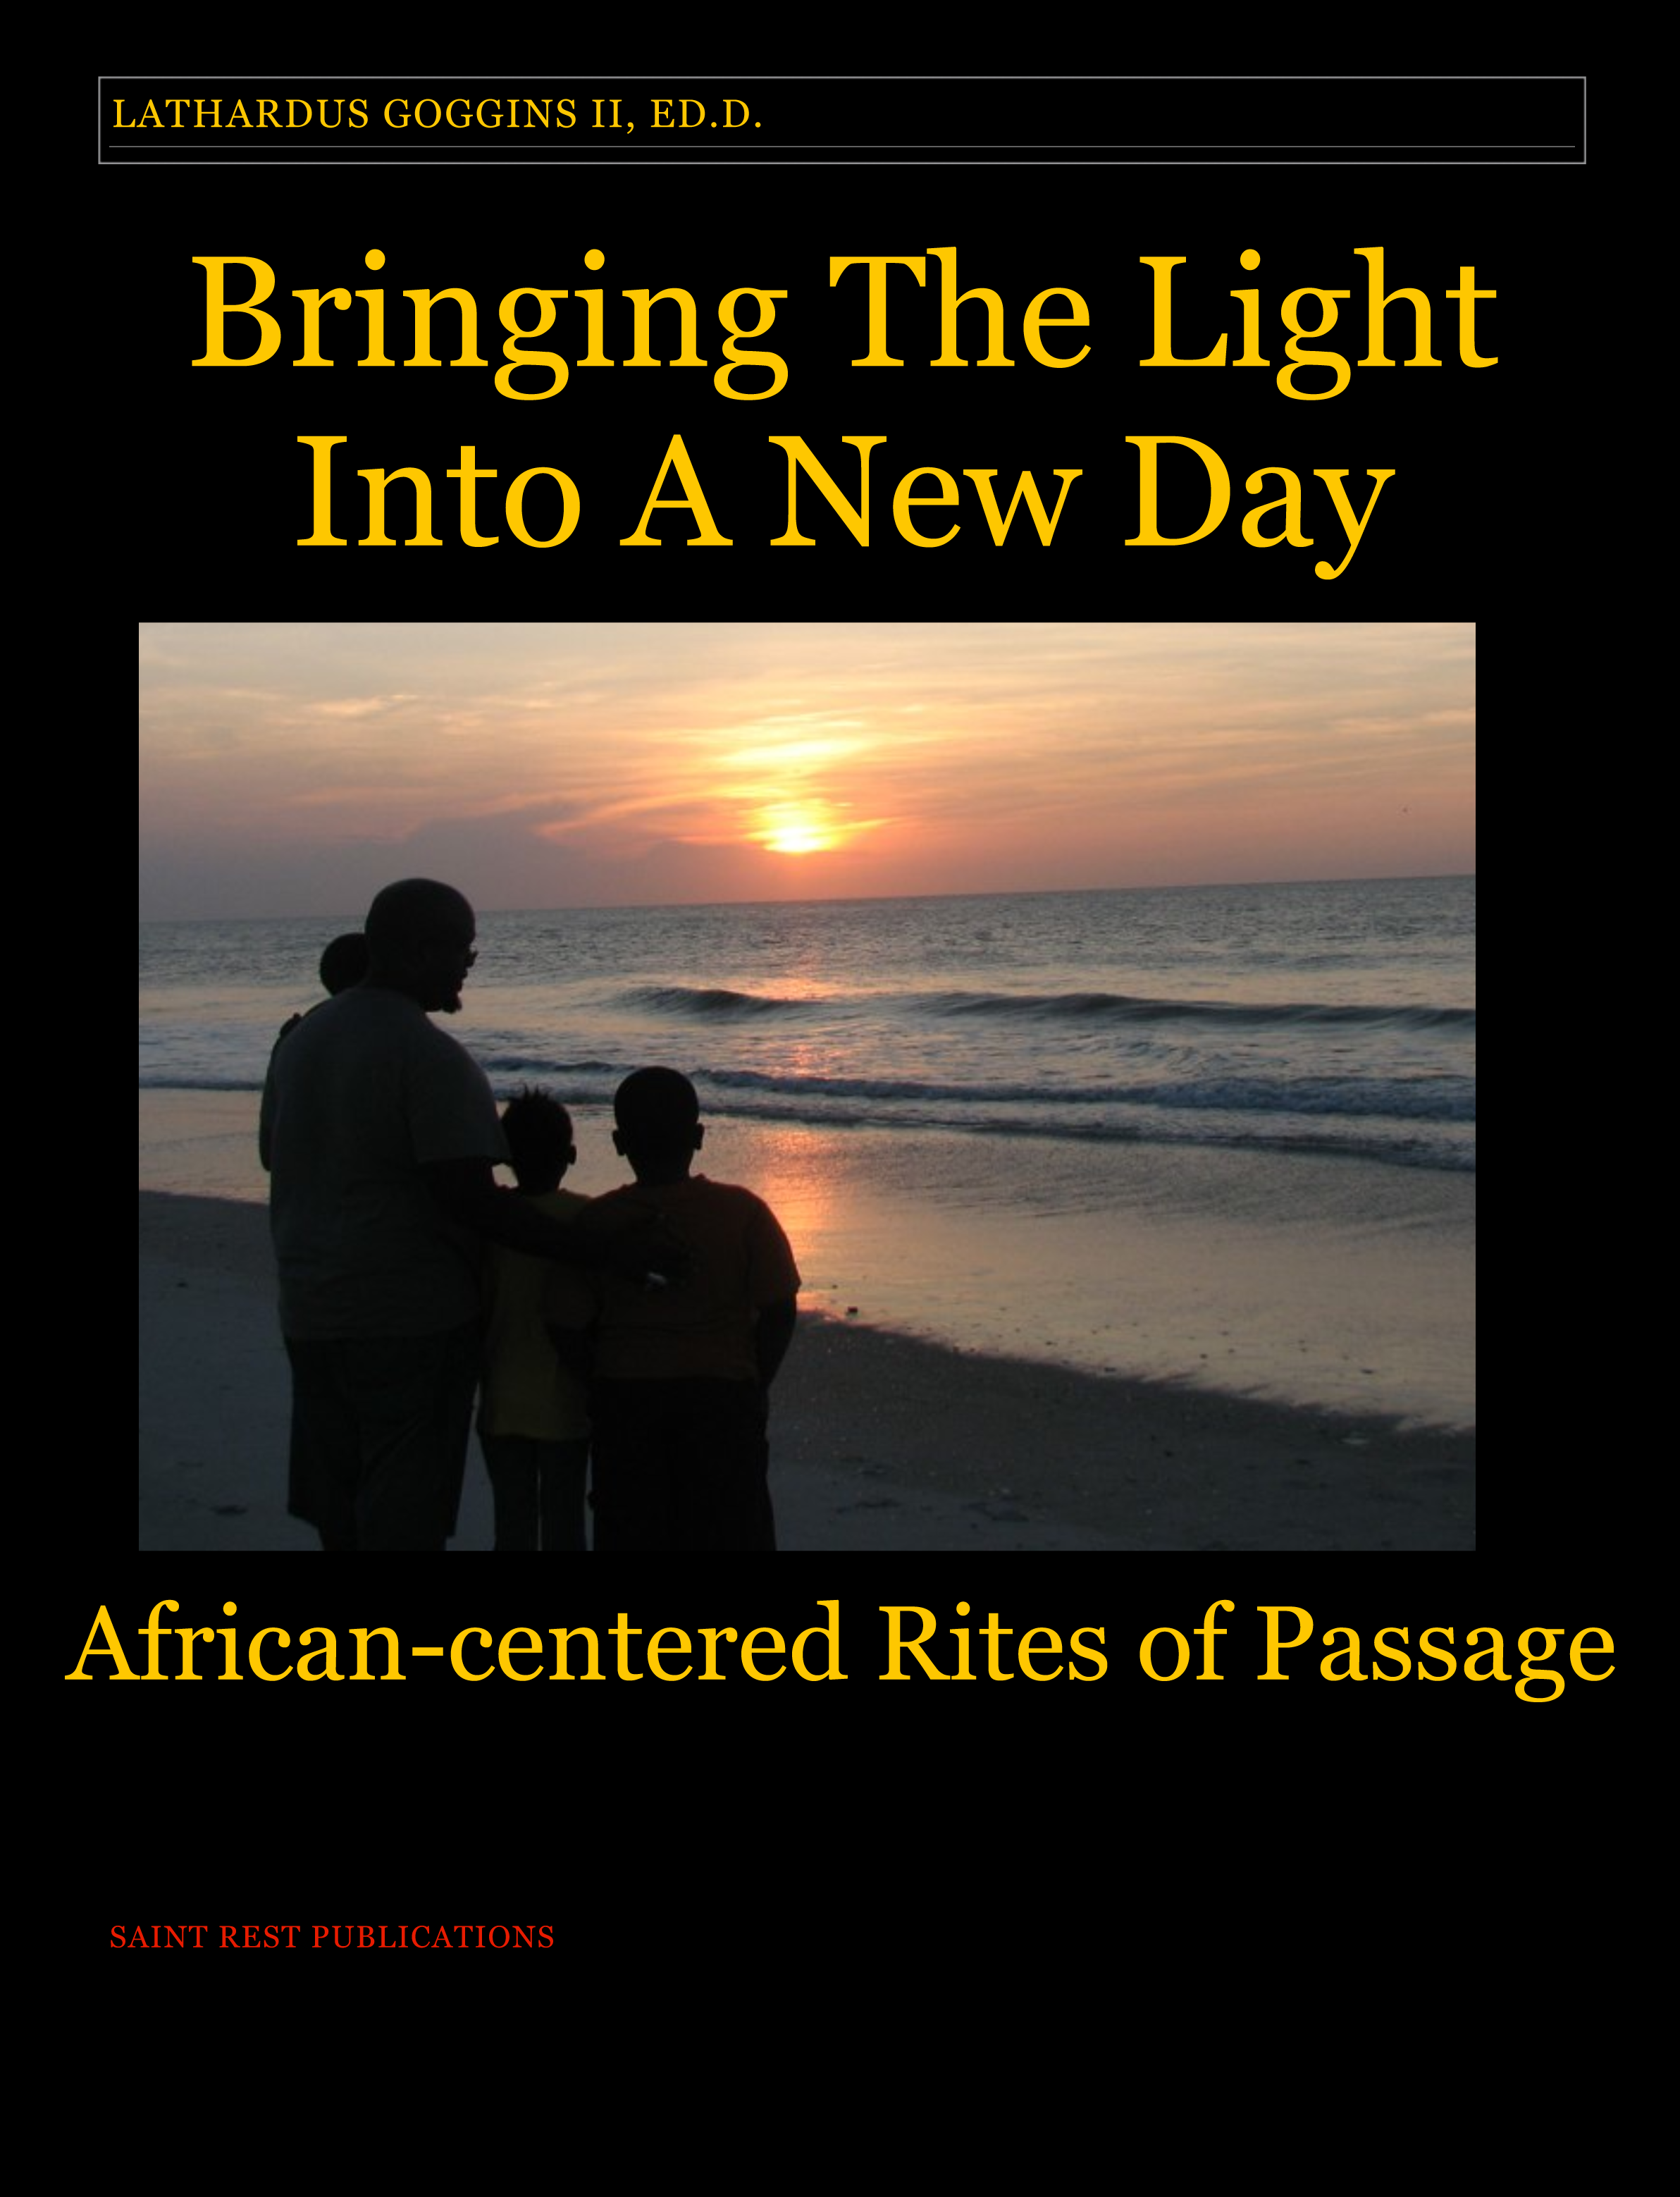 Bringing the Light Into A New Day: African Centered Rites of Passage